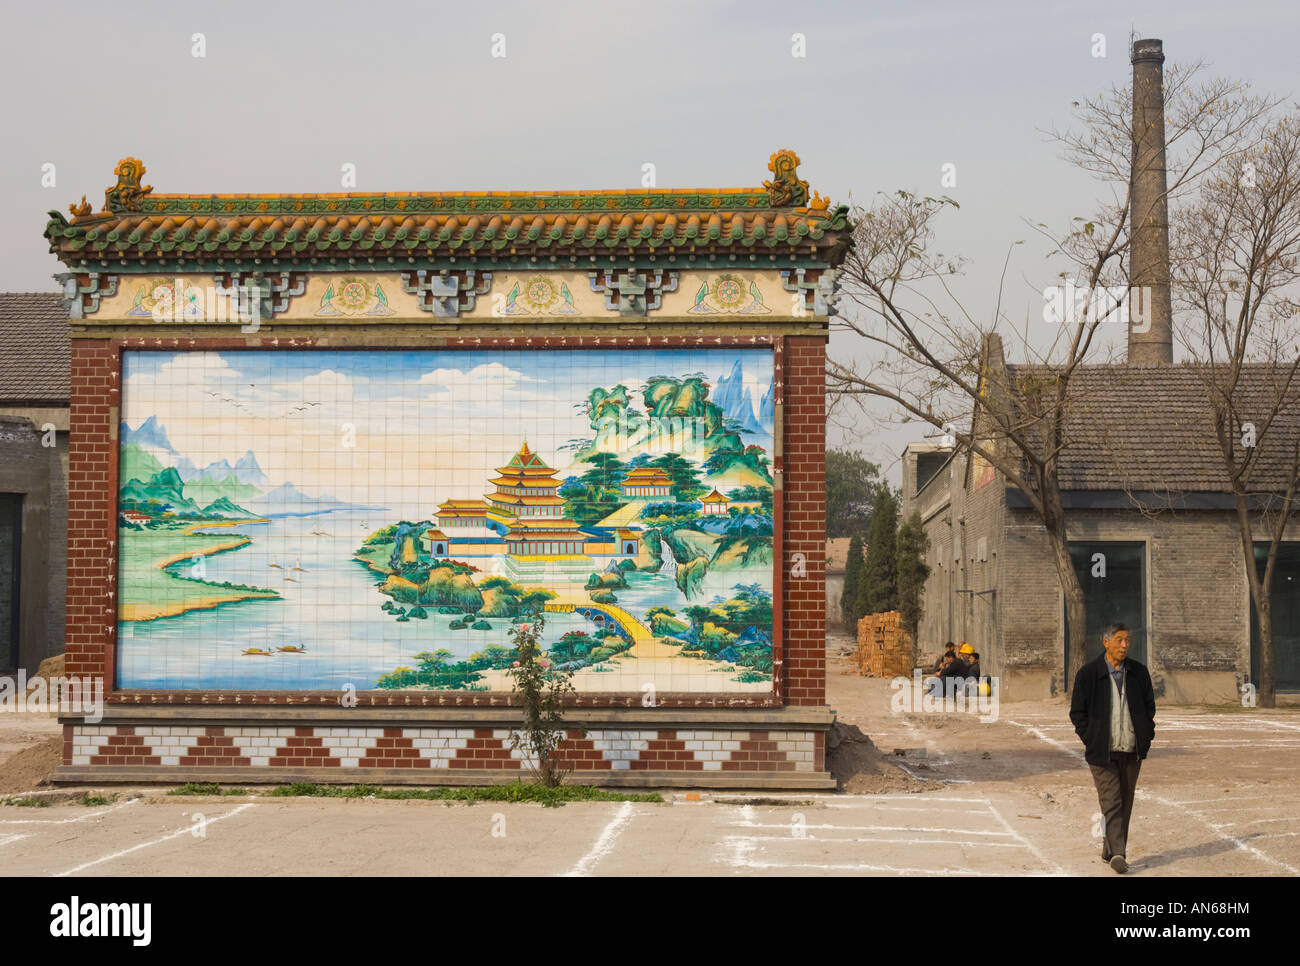 China Shanxi Pingyao poor neighbourhood with chimney and decorated wall showing dreamy landscape Stock Photo